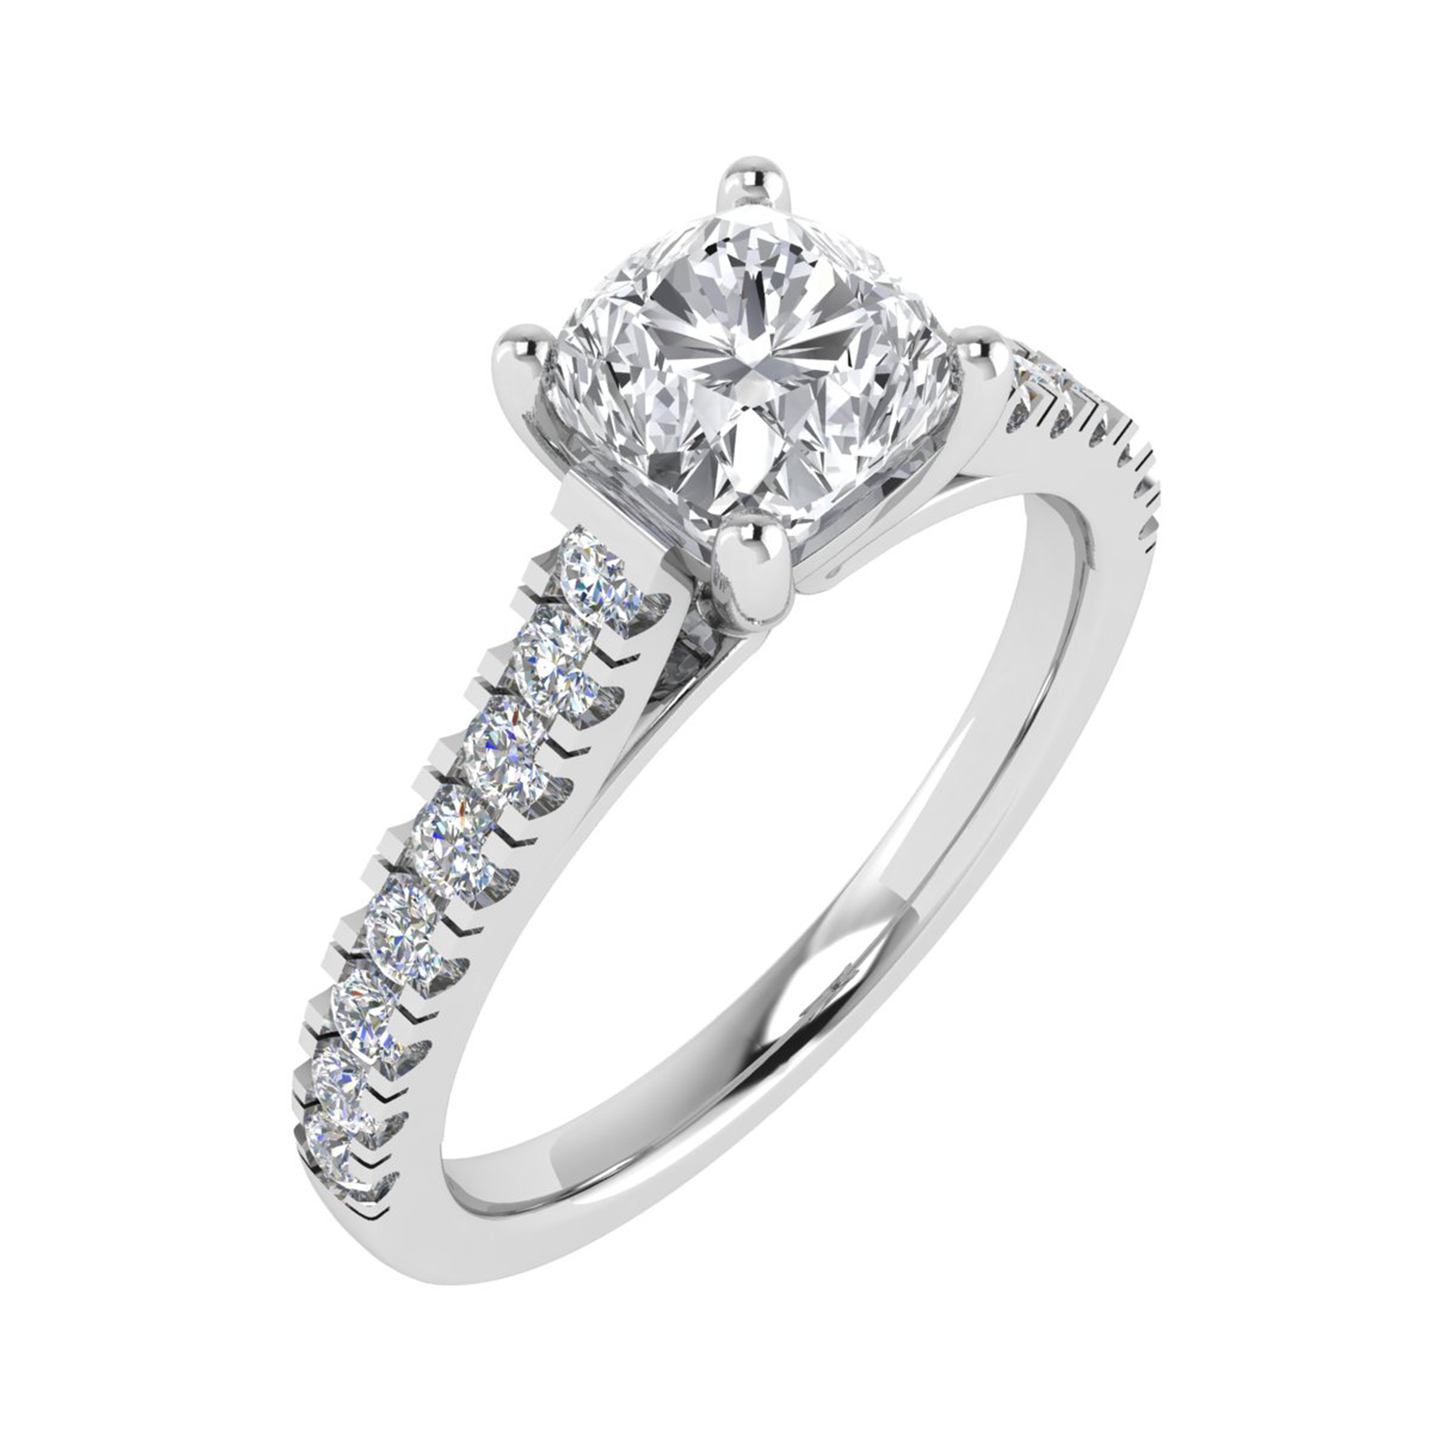 4mm Cushion Ring with Diamond set shoulders